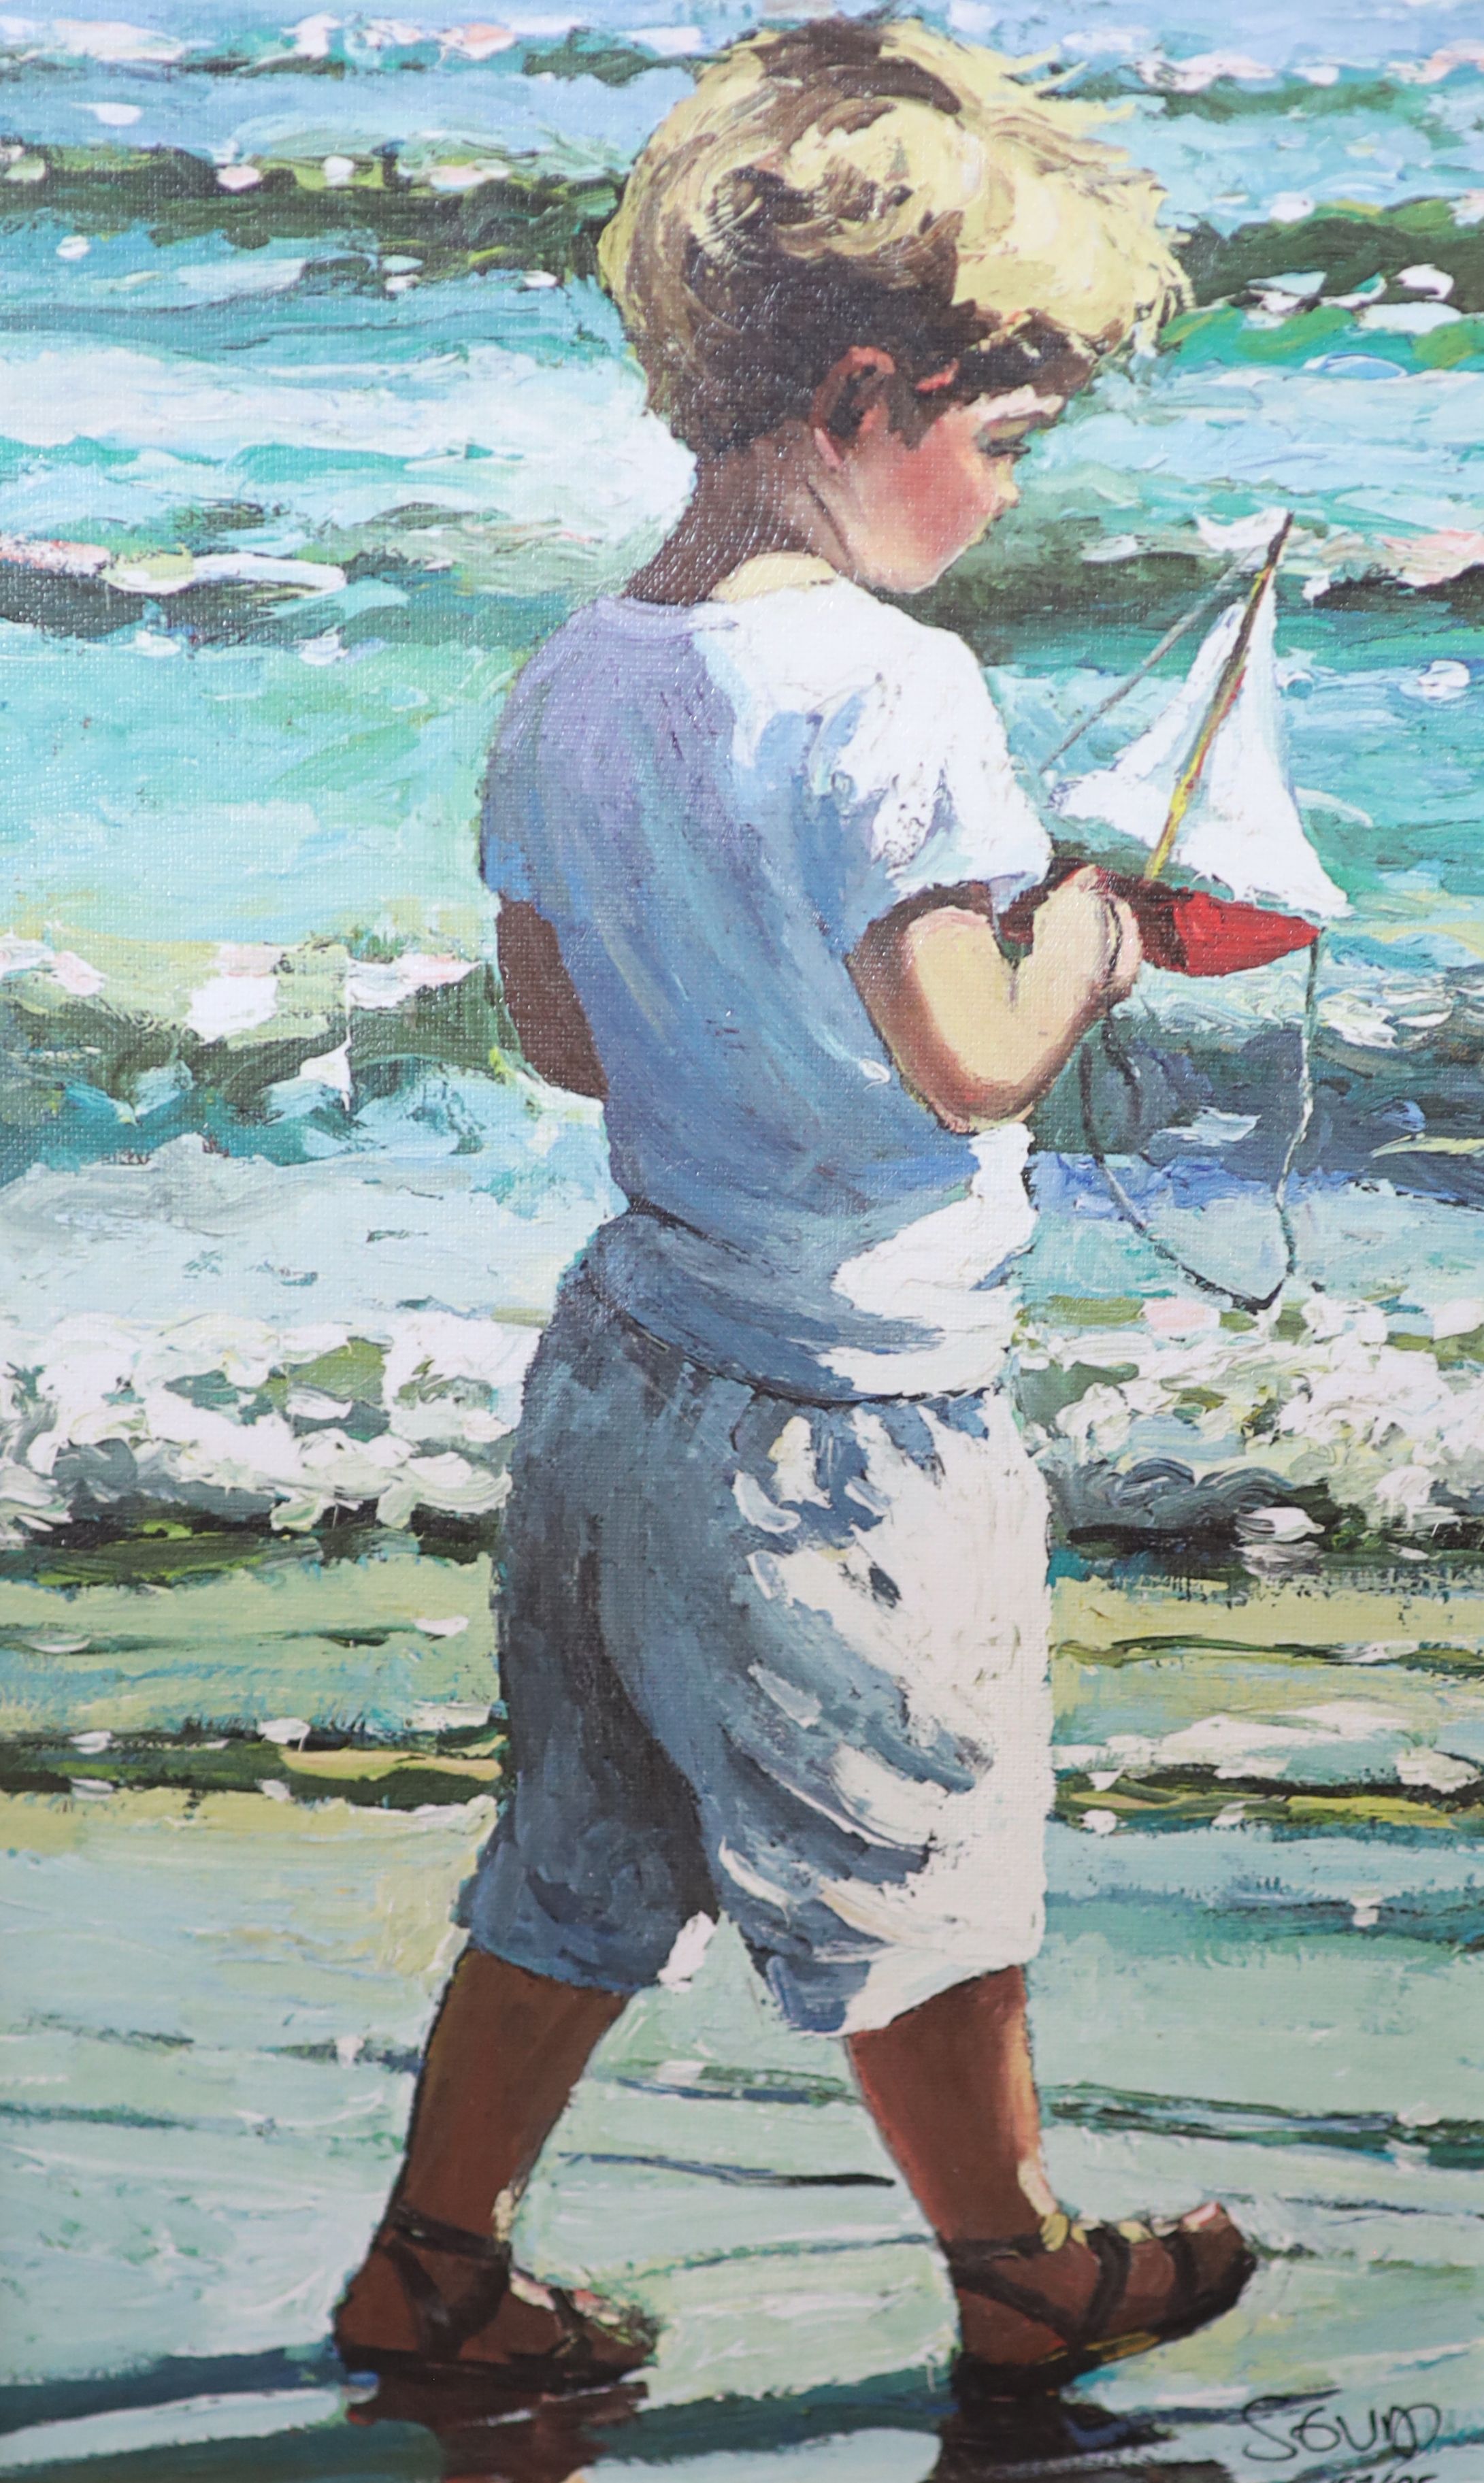 Sherree Valentine Daines, hand embellished canvas, The Red Toy Boat, 157/195, with COA, 39 x 24cm.